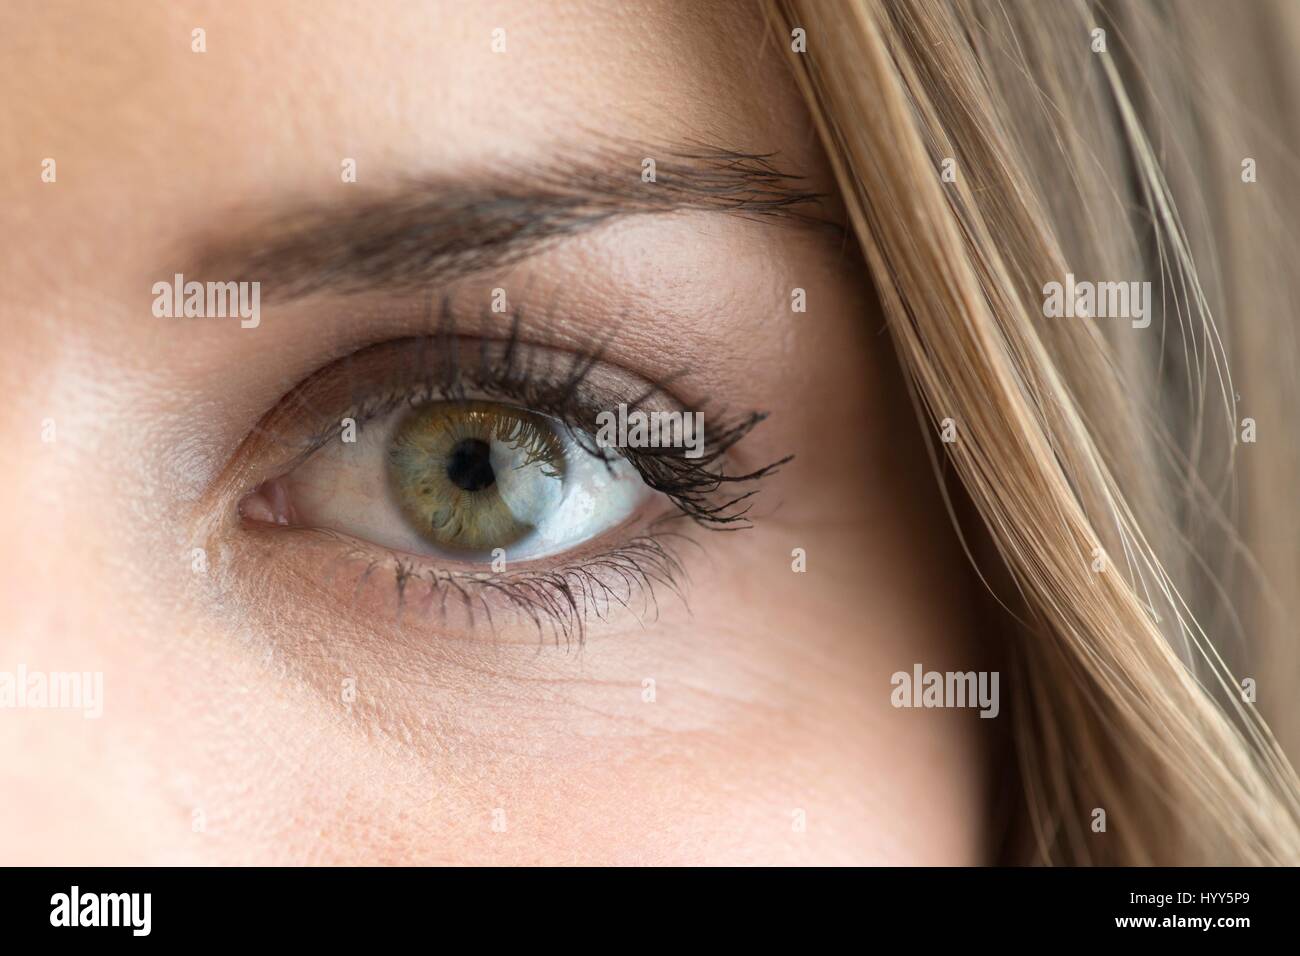 Close up of woman's eye. Stock Photo